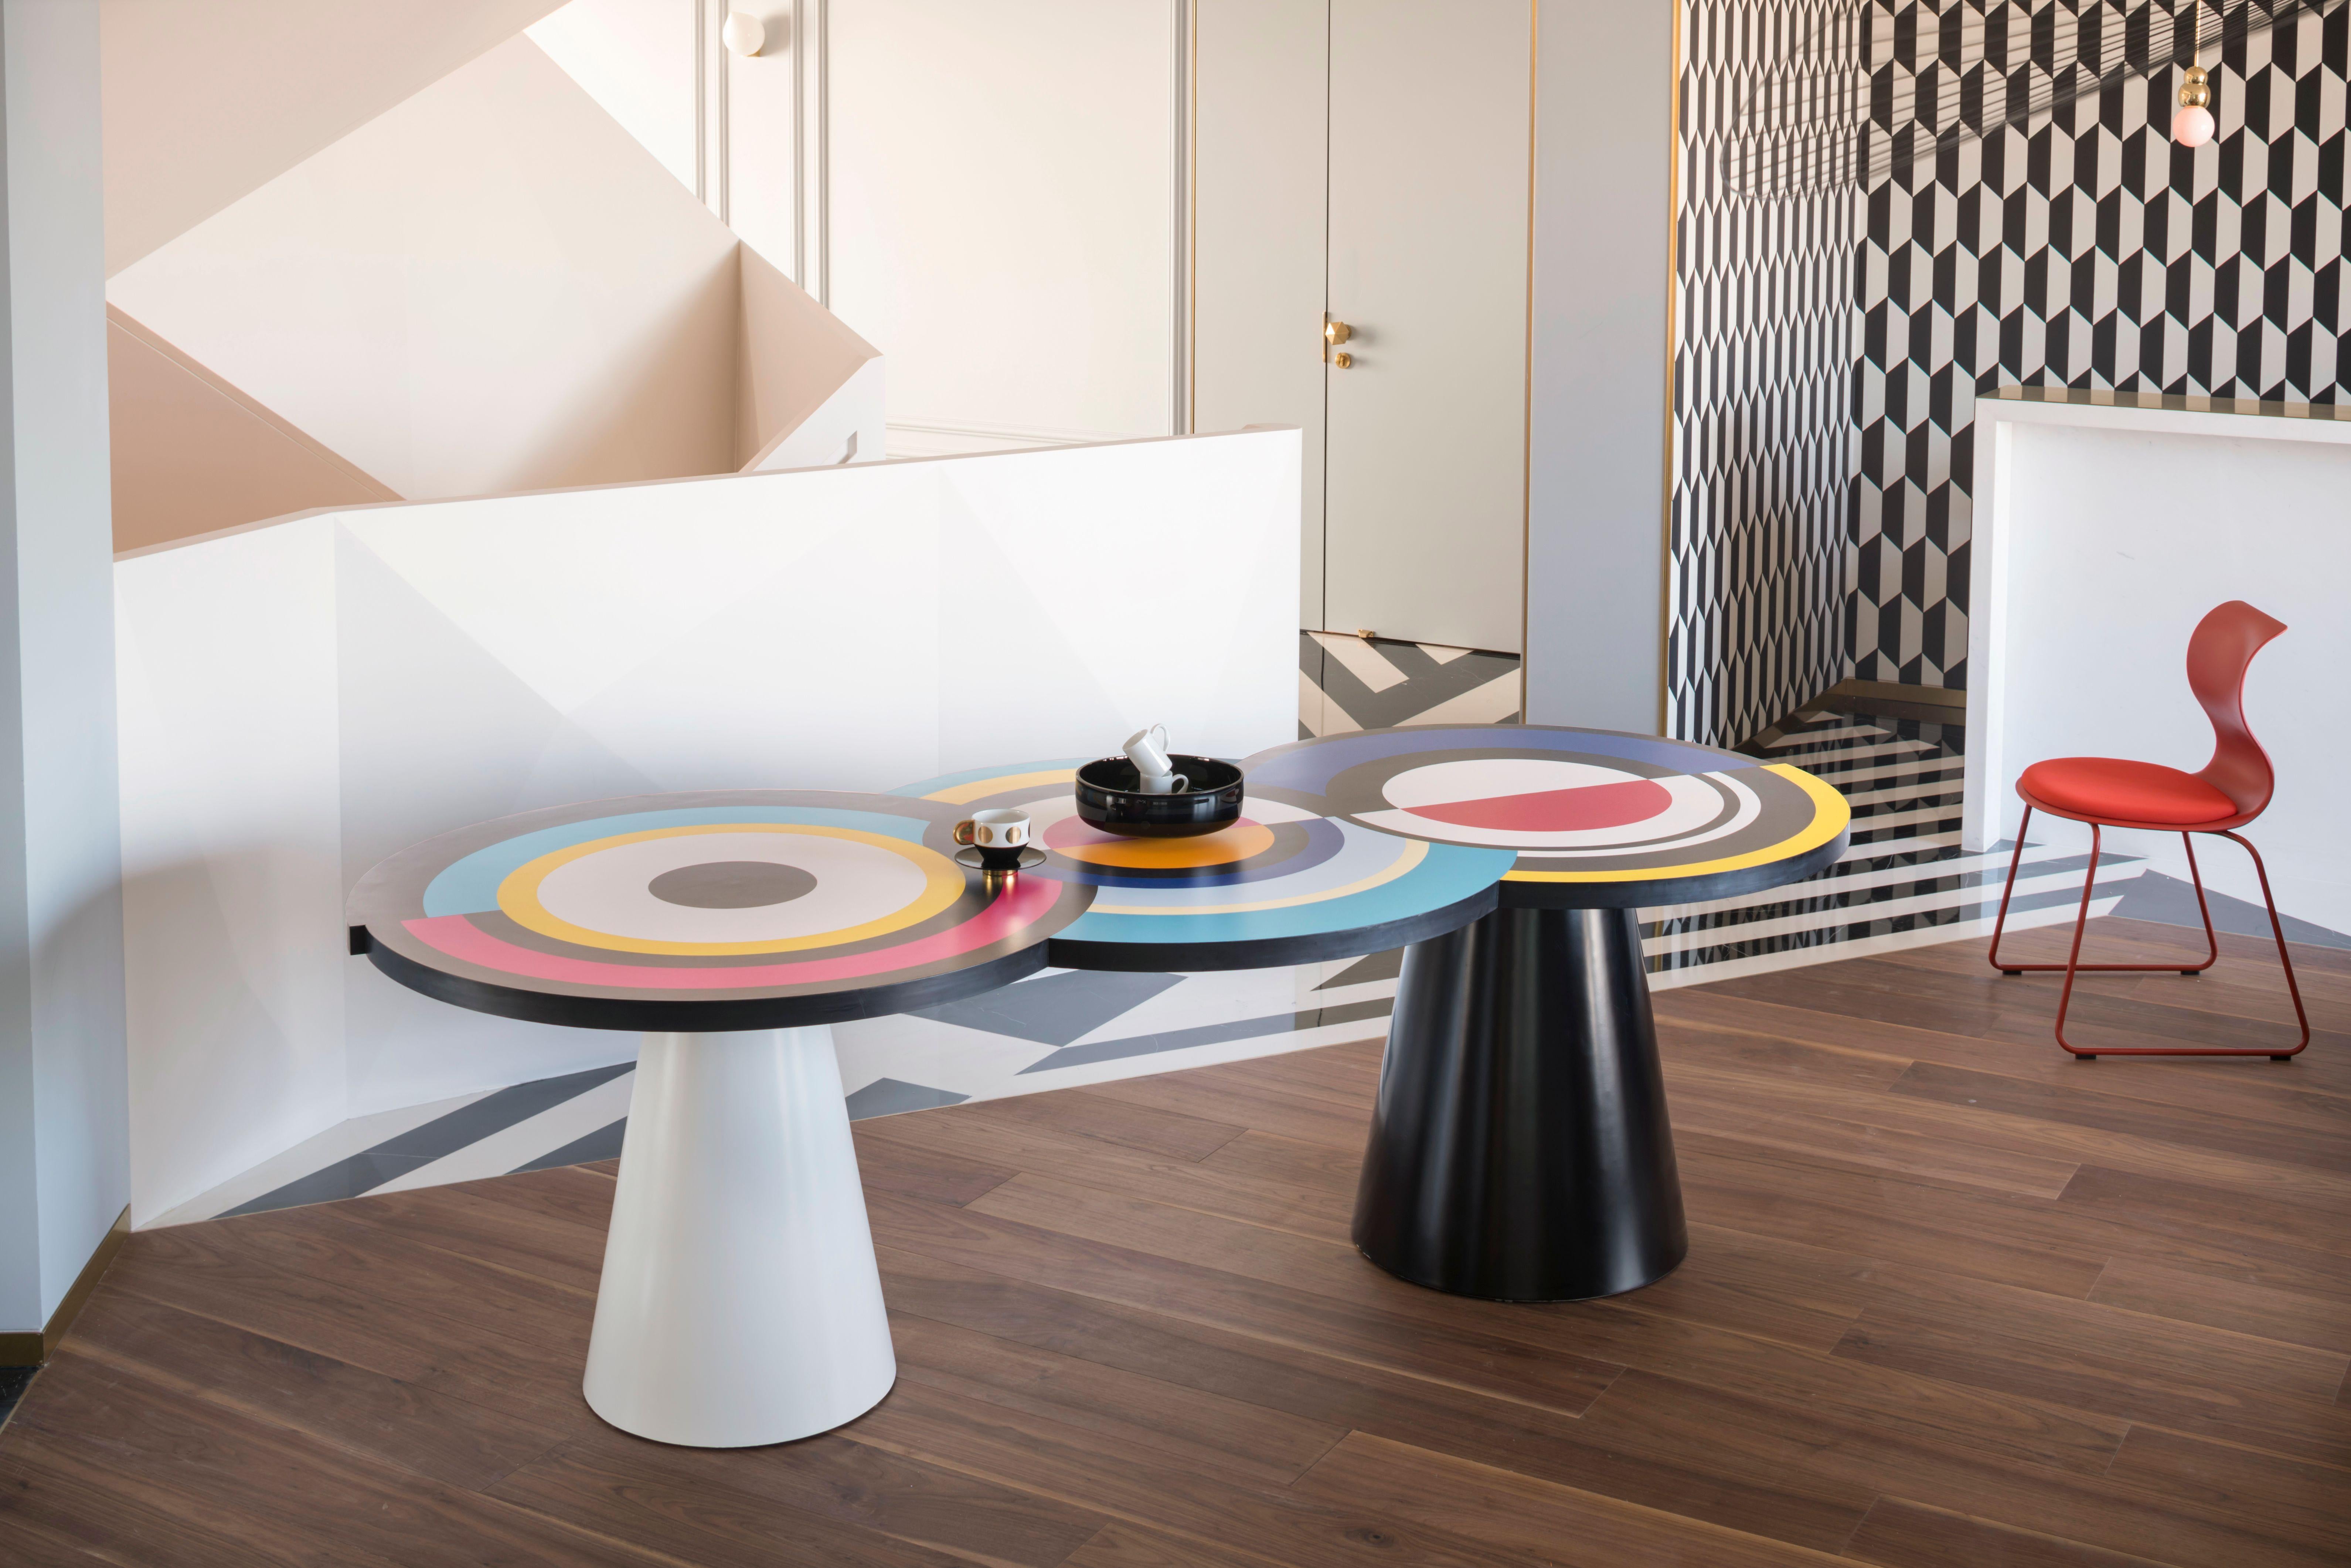 Homage to Delaunay dining table by Thomas Dariel, Maison Dada
Measures: W236 x D108 x H74 cm
Structure in MDF • Base painted in matte color finish
Printed laminate top
Sonia et Cætera pays homage to the famous French painter Sonia Delaunay, known